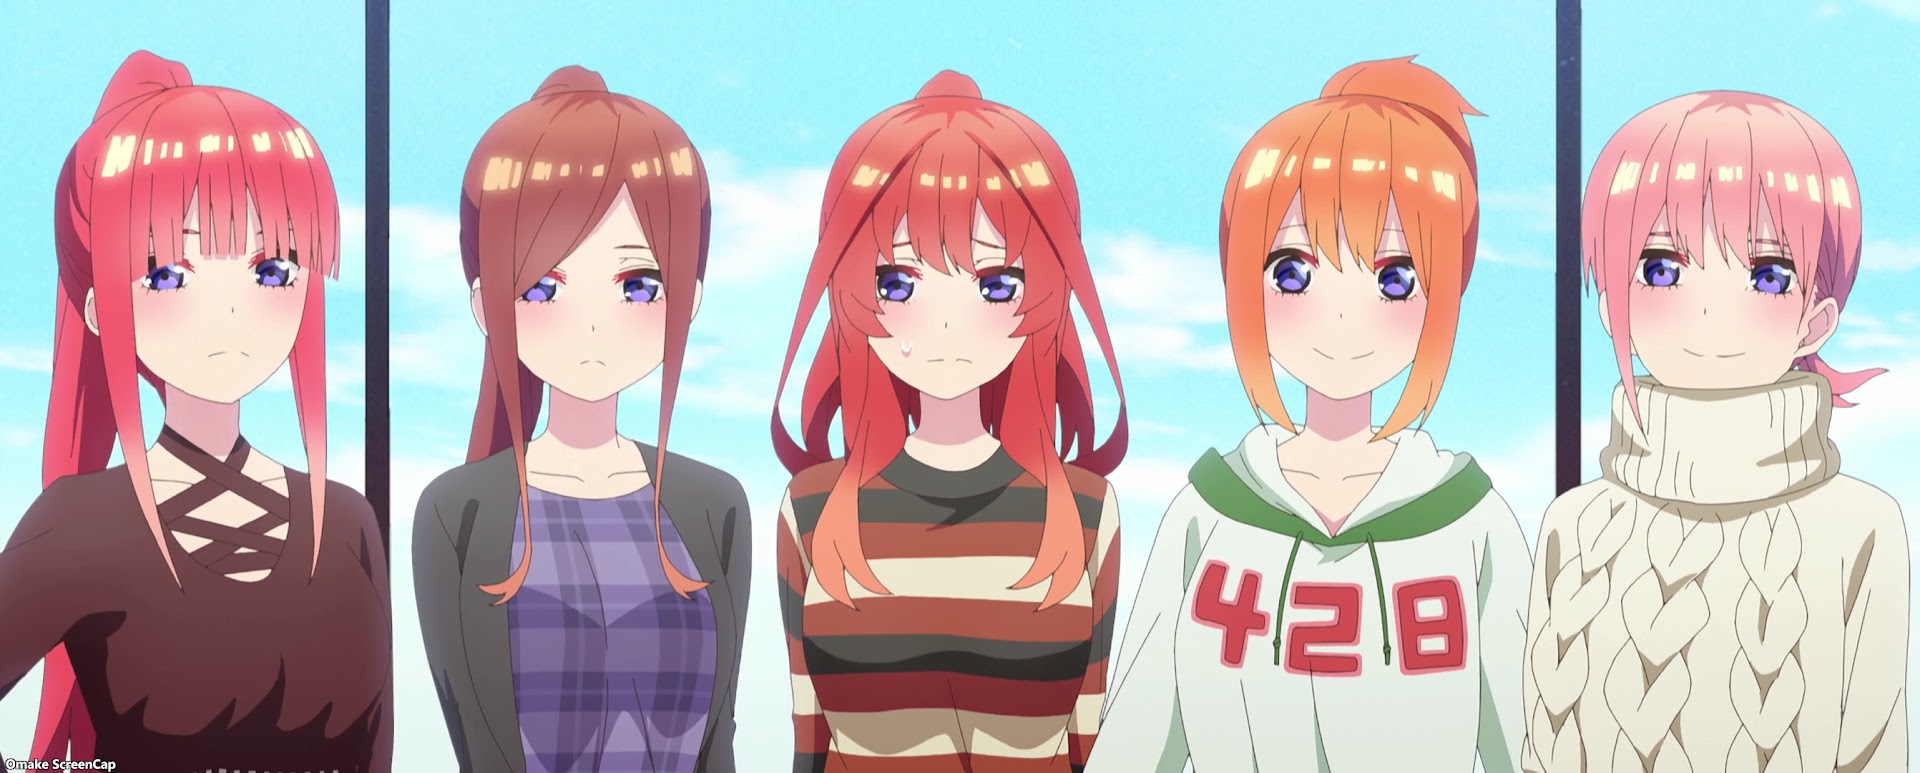 Go-Toubun no Hanayome - Go-Toubun no Hanayome (The Quintessential  Quintuplets) Season 2 - Episode 9 [Screenshots] Flying kiss by our second  sister, Nakano Nino. Once again, she's making her way to Futarou-kyun ~